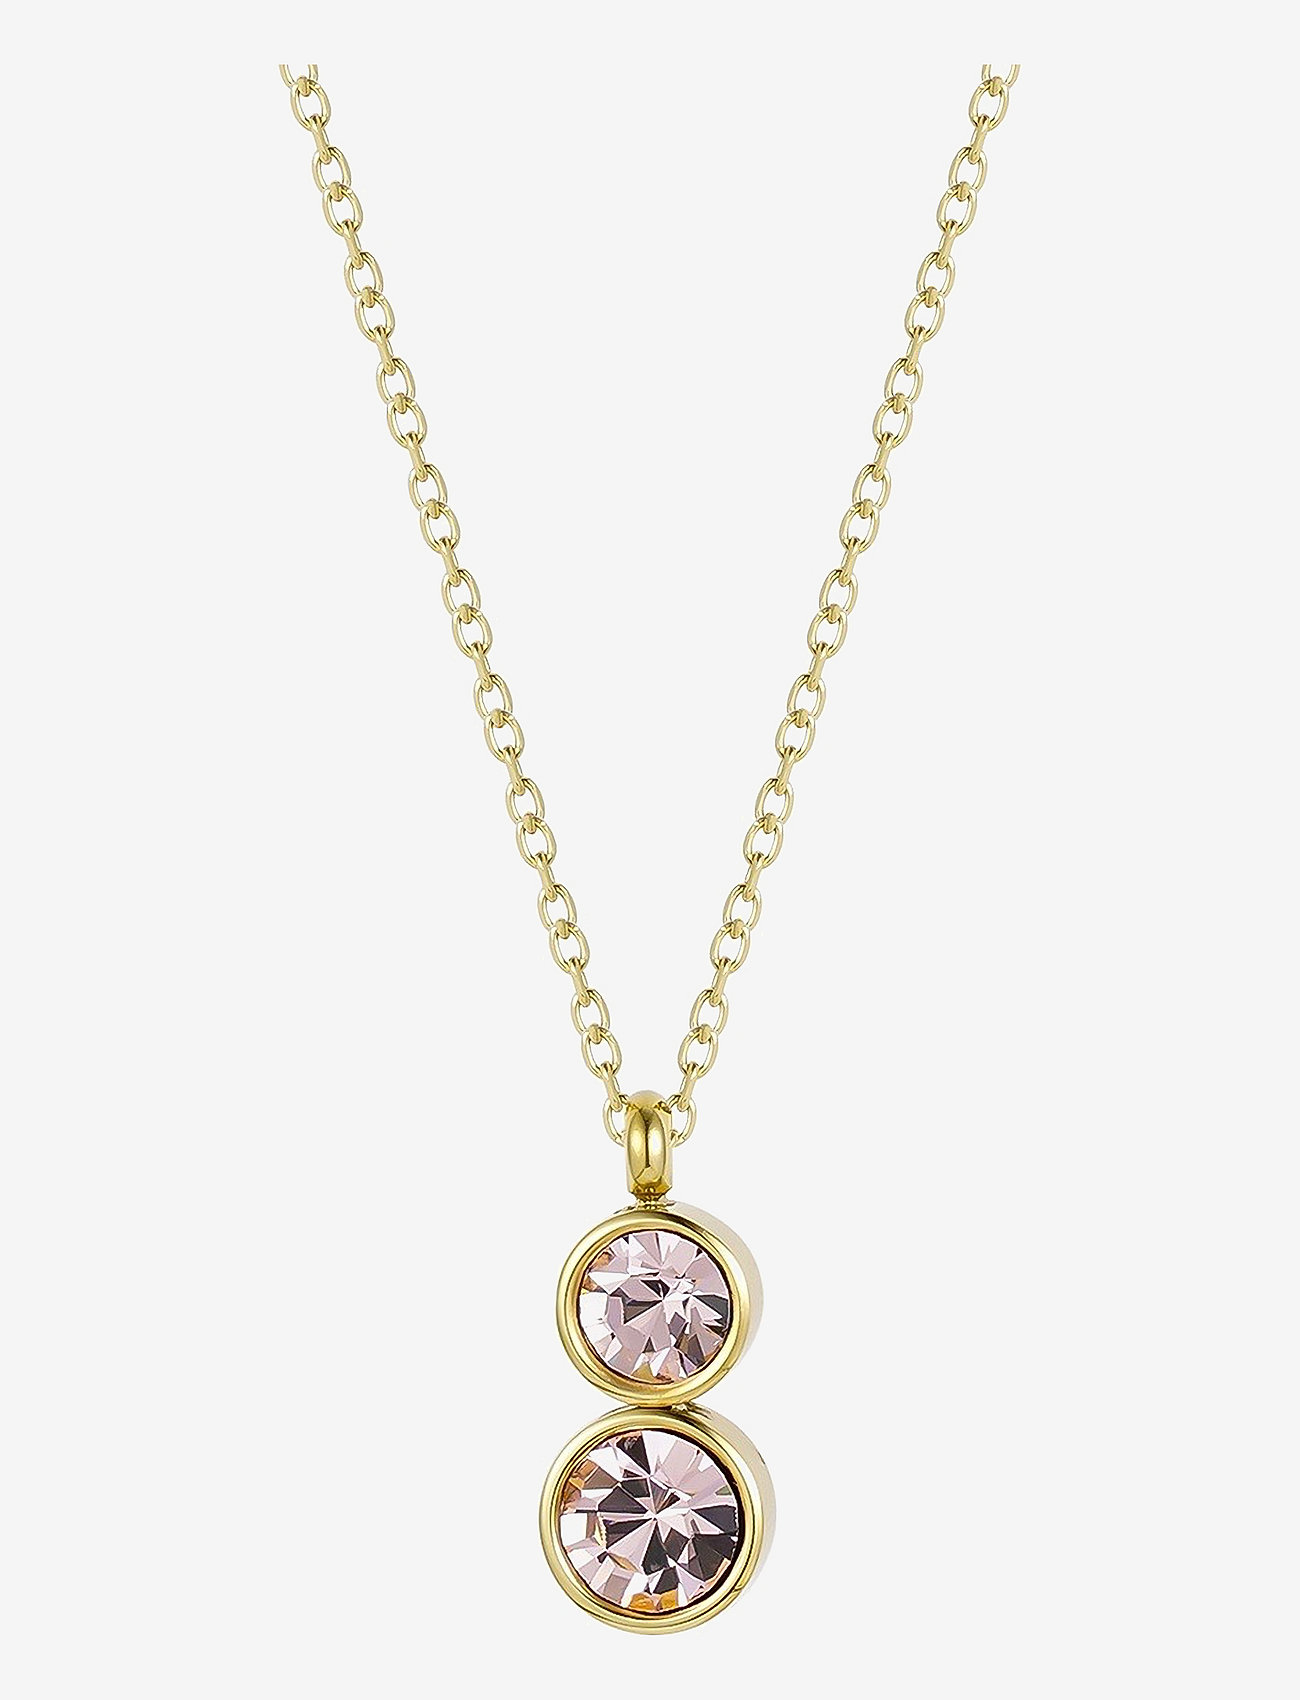 Bud to rose - Lima Duo Necklace Vintage Rose/Gold - ketten mit anhänger - gold - 0